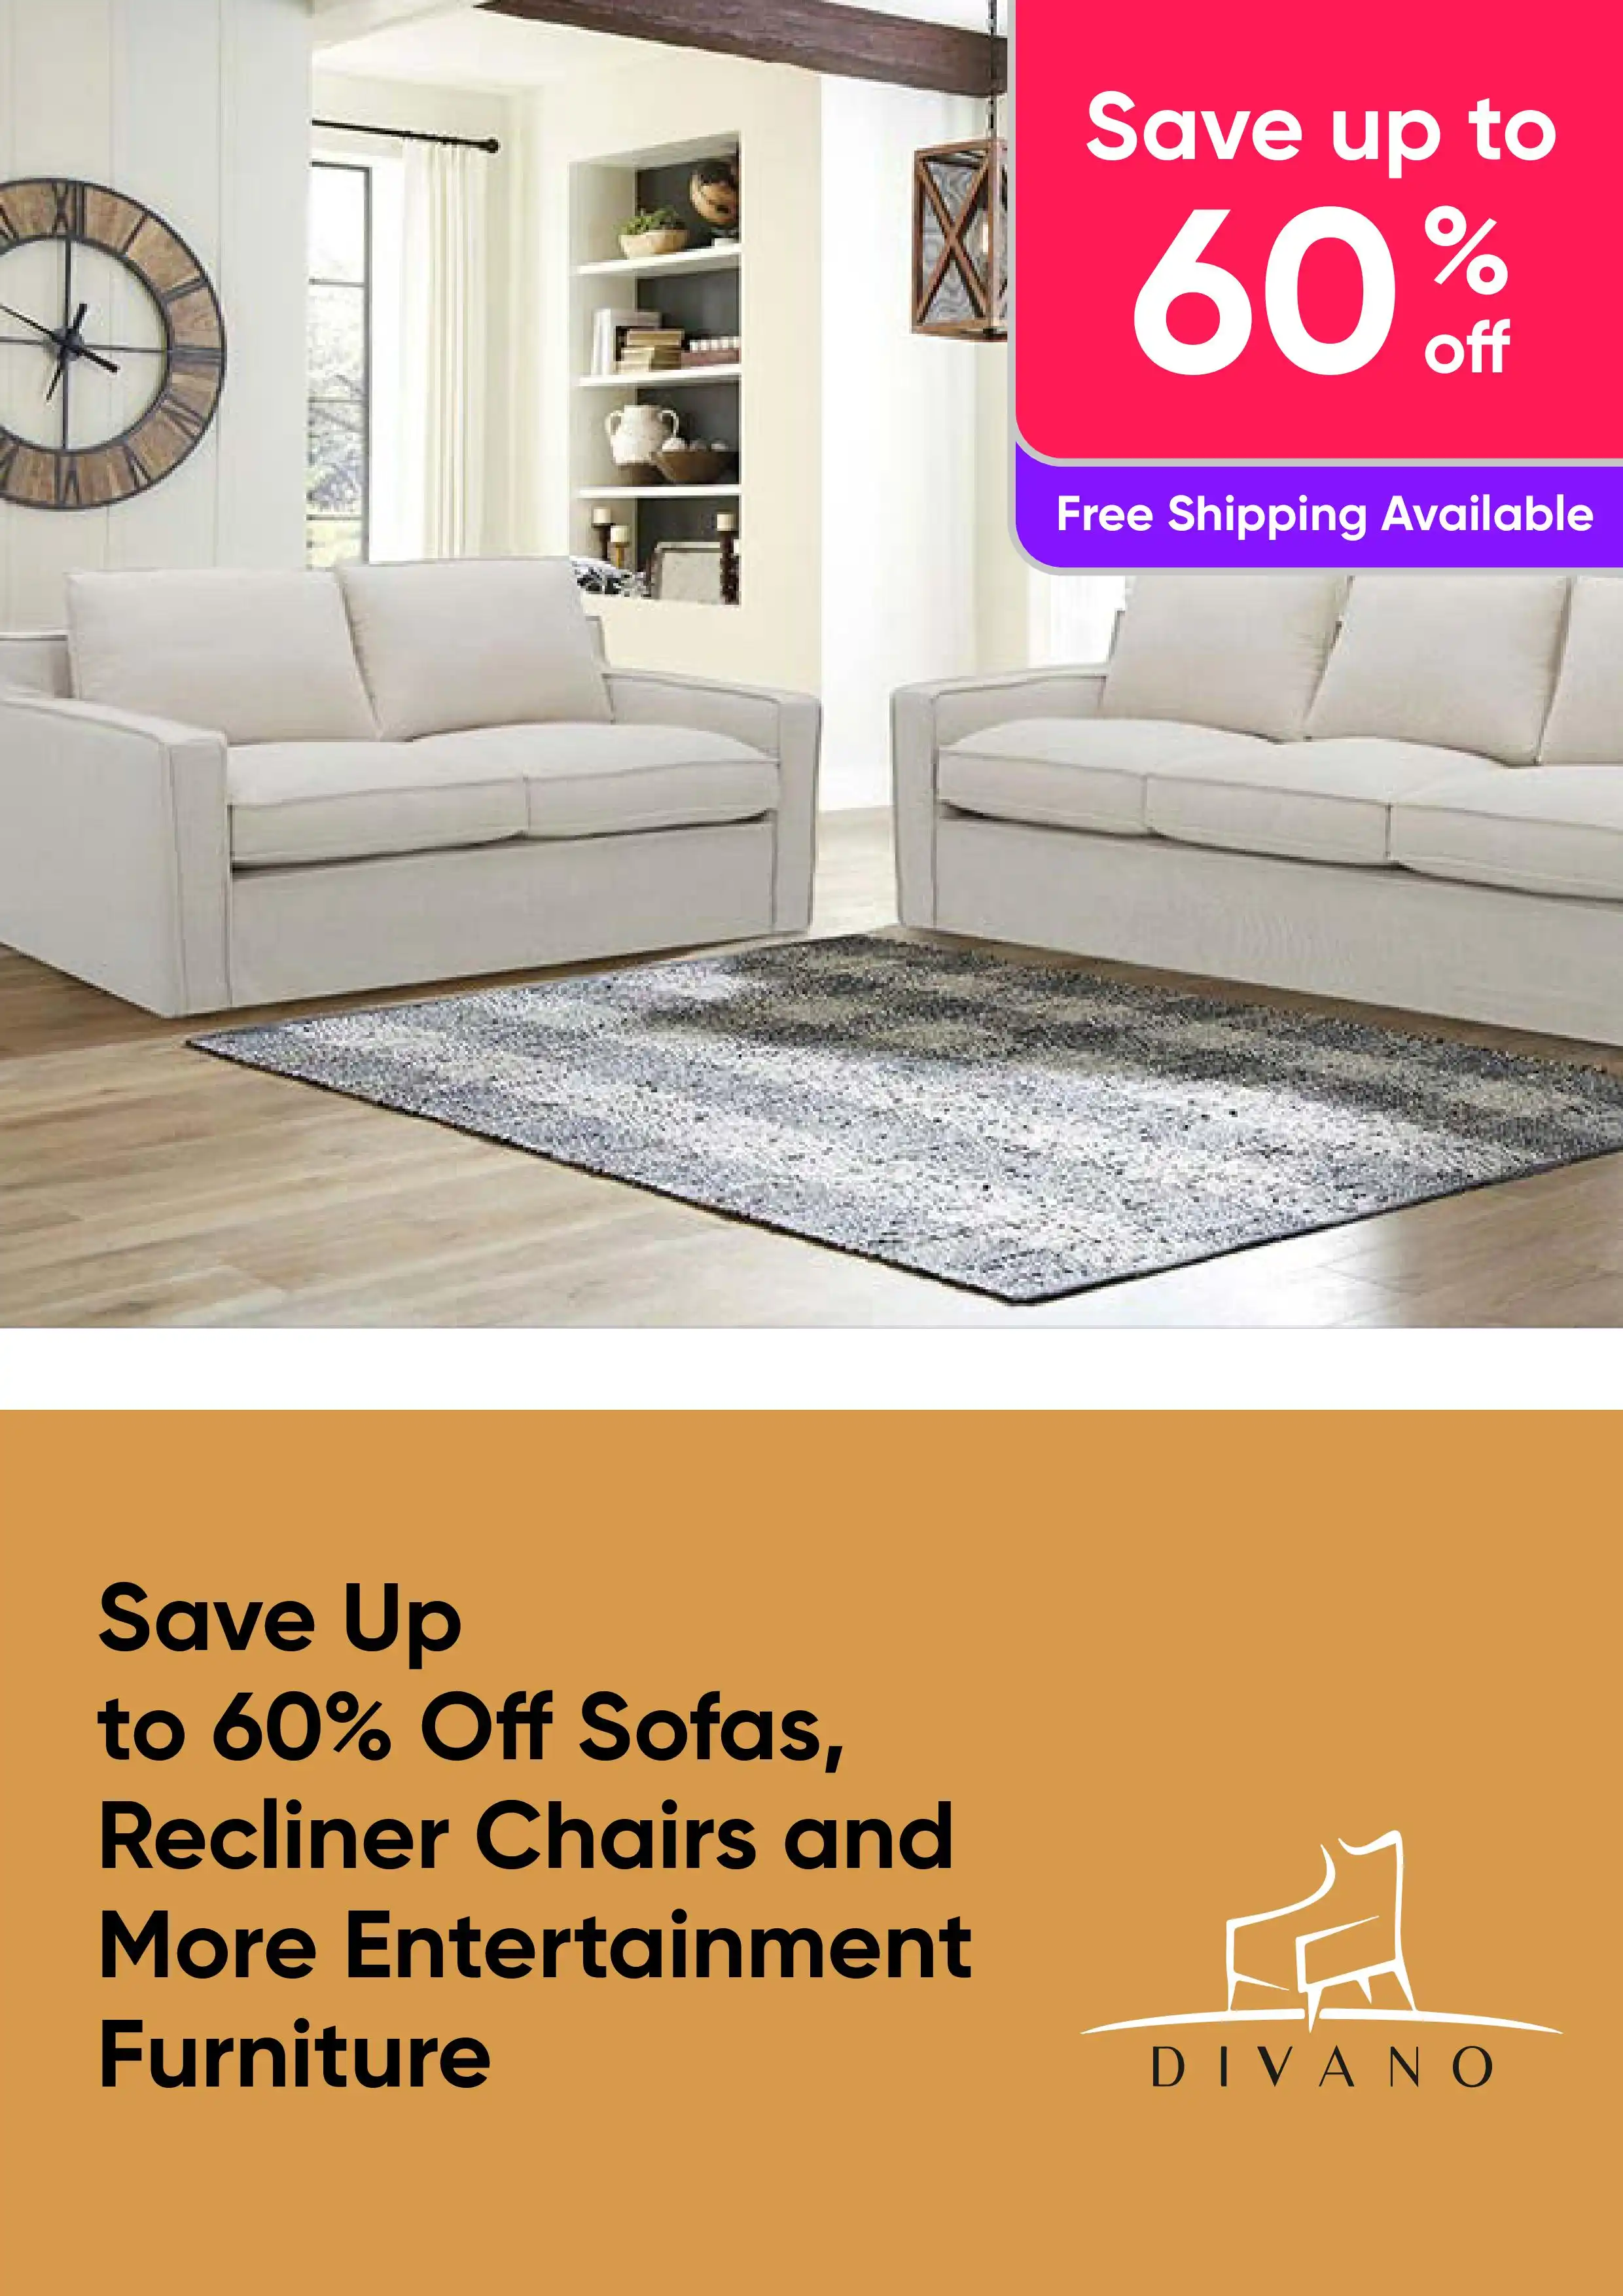 Save Up to 60% Off Sofas, Recliner Chairs and More Entertainment Furniture by Divano